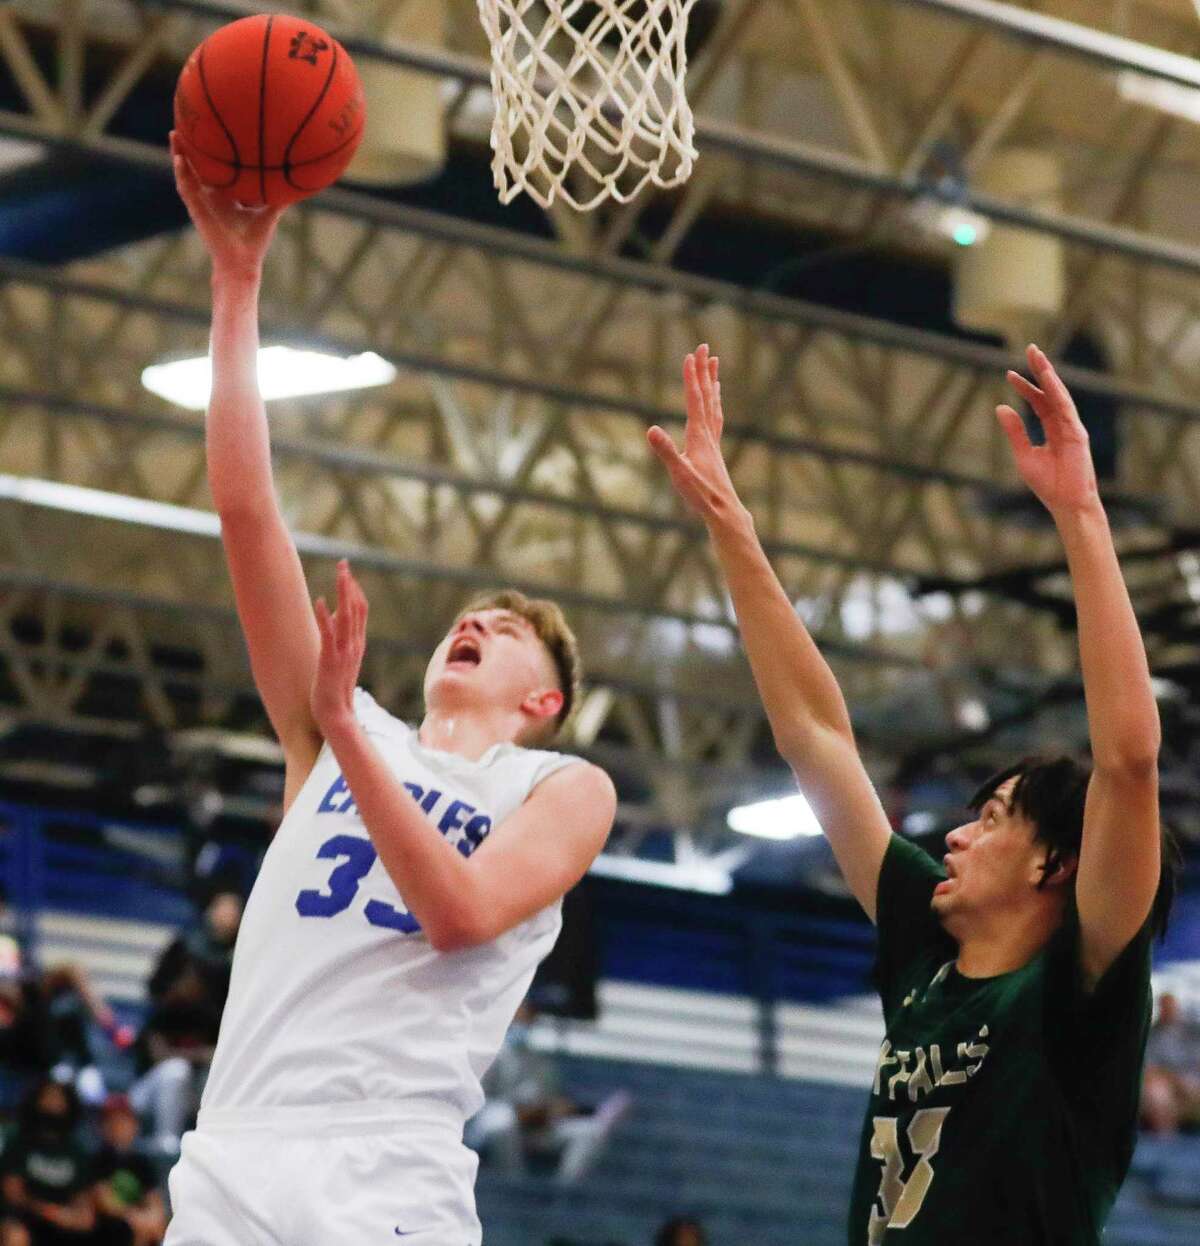 New Caney center Braden Sheldon (33), shown here last month, had 21 points to lead the Eagles over Caney Creek Tuesday night.